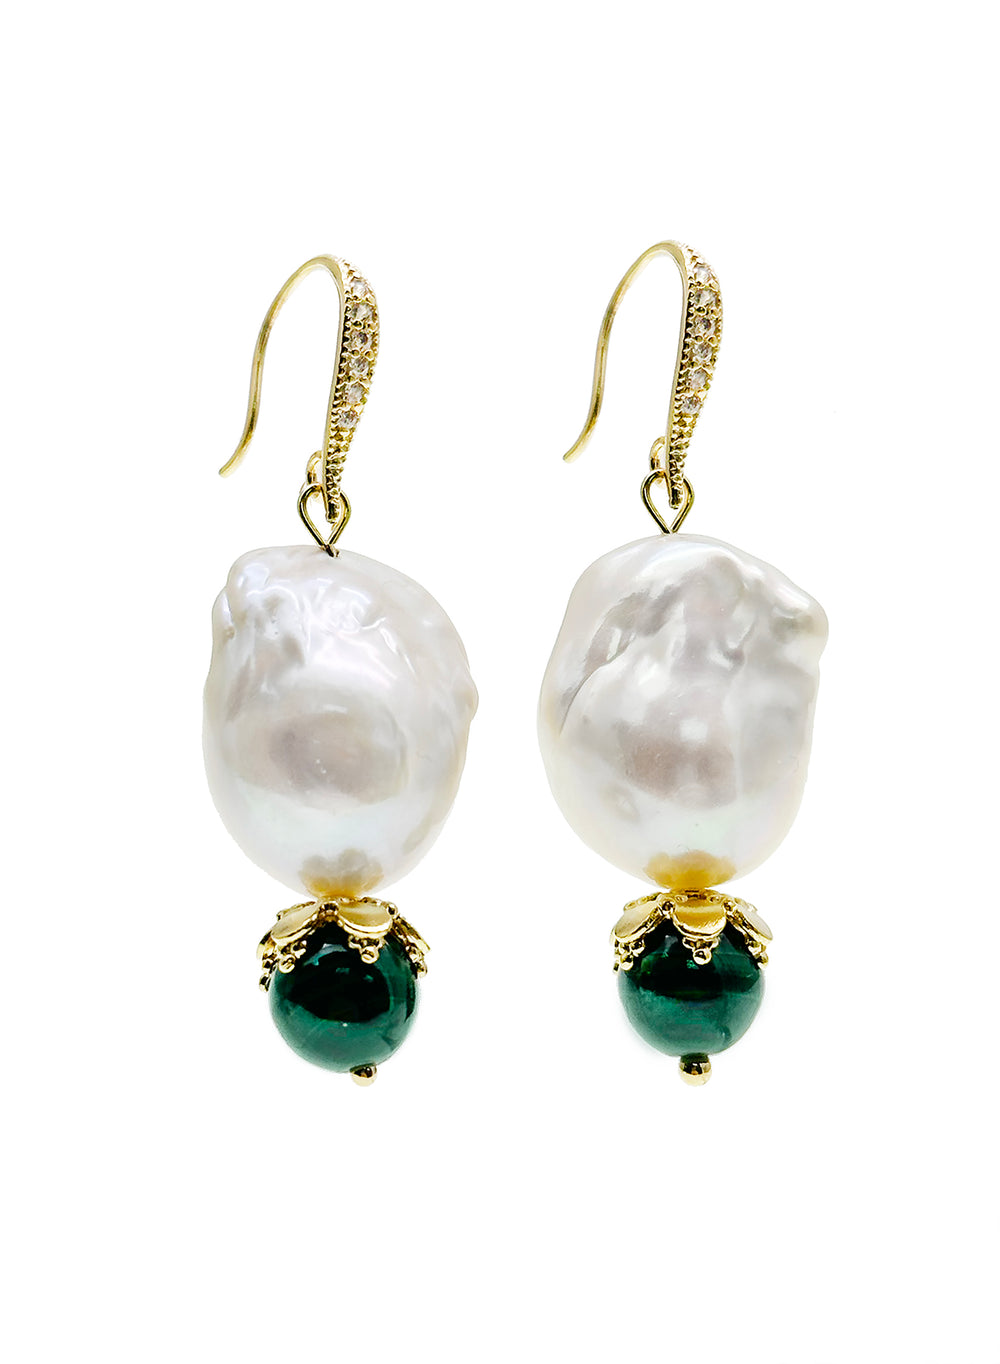 Baroque Pearl With Malachite Round Stone Earrings JE039 - FARRA